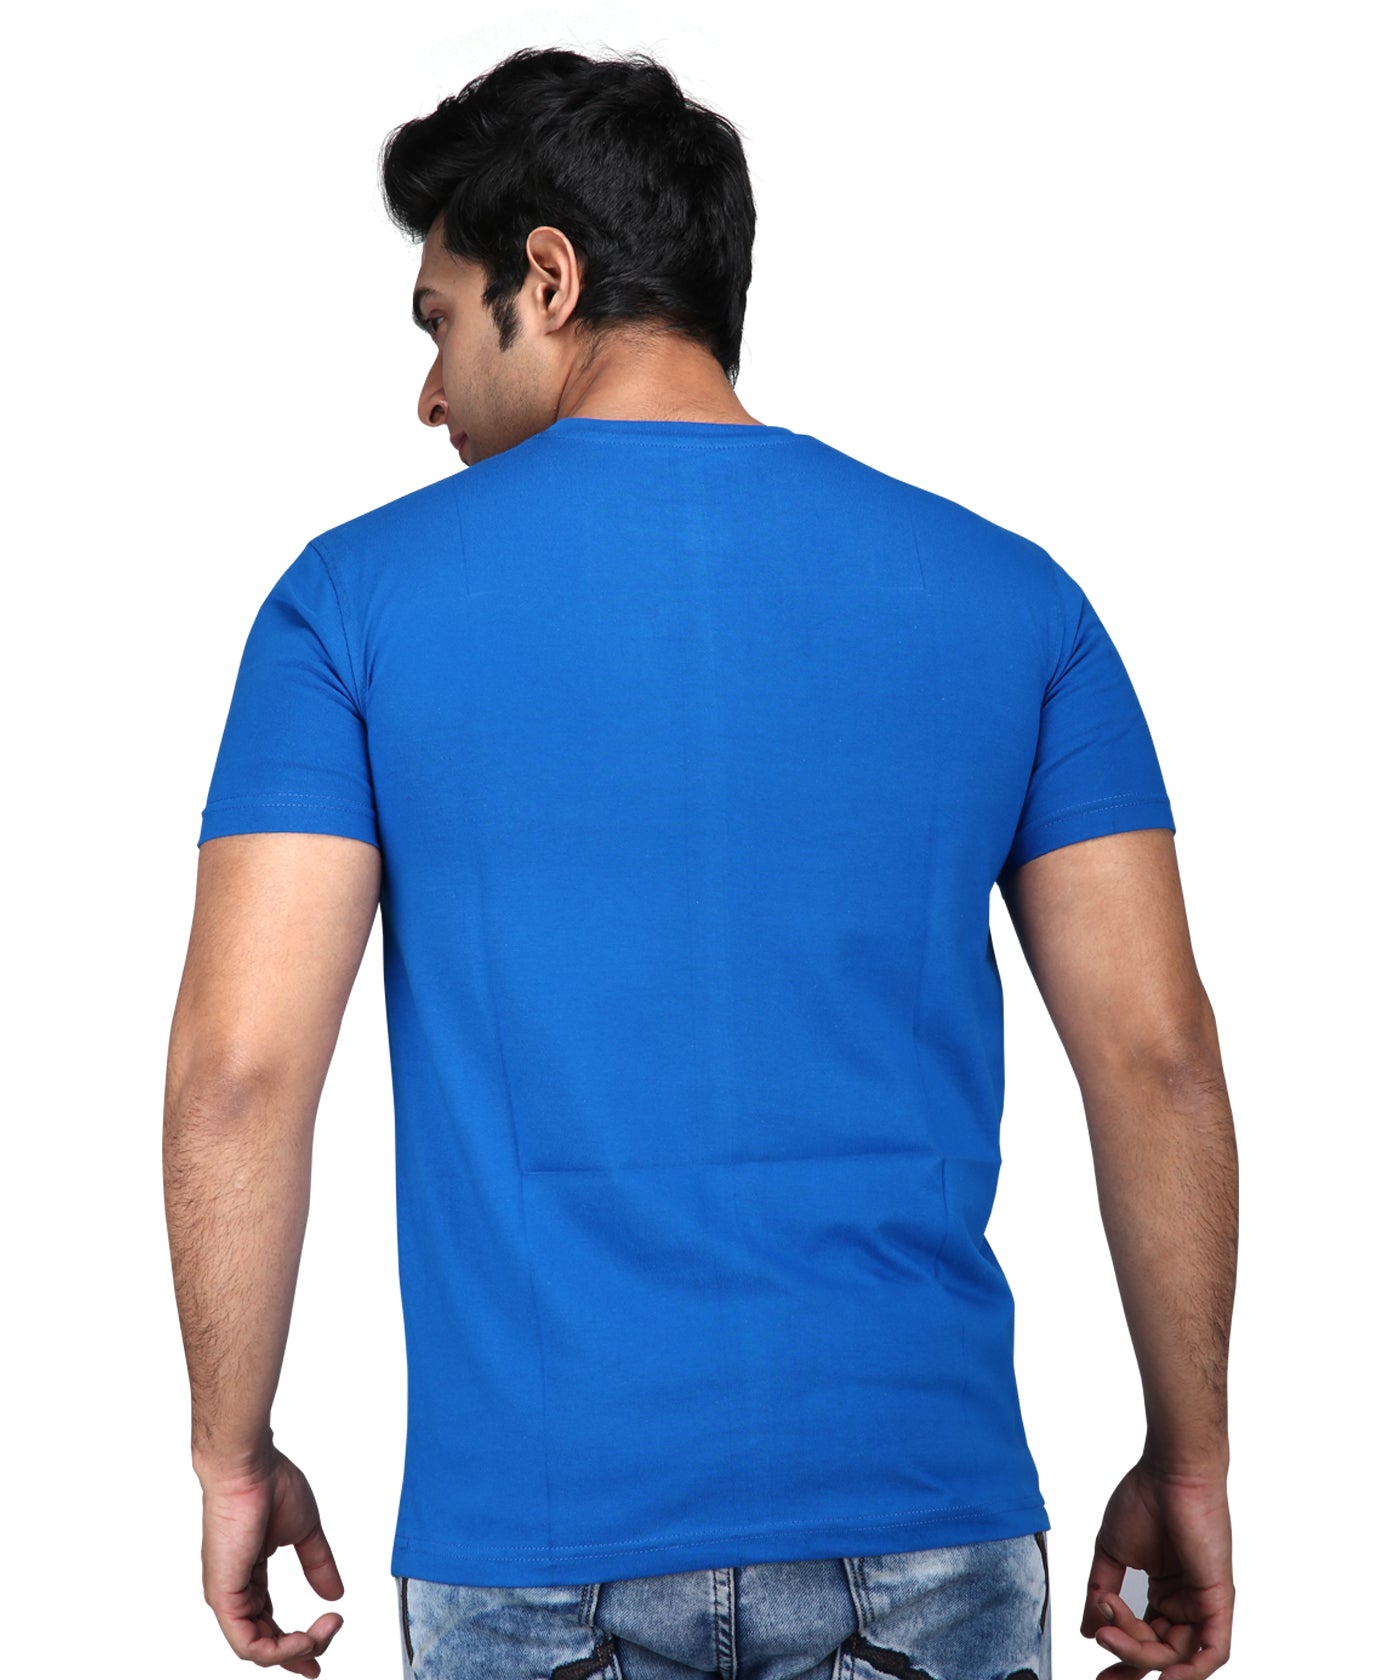 Just Chill - Premium Round Neck Cotton Tees for Men - Electric Blue